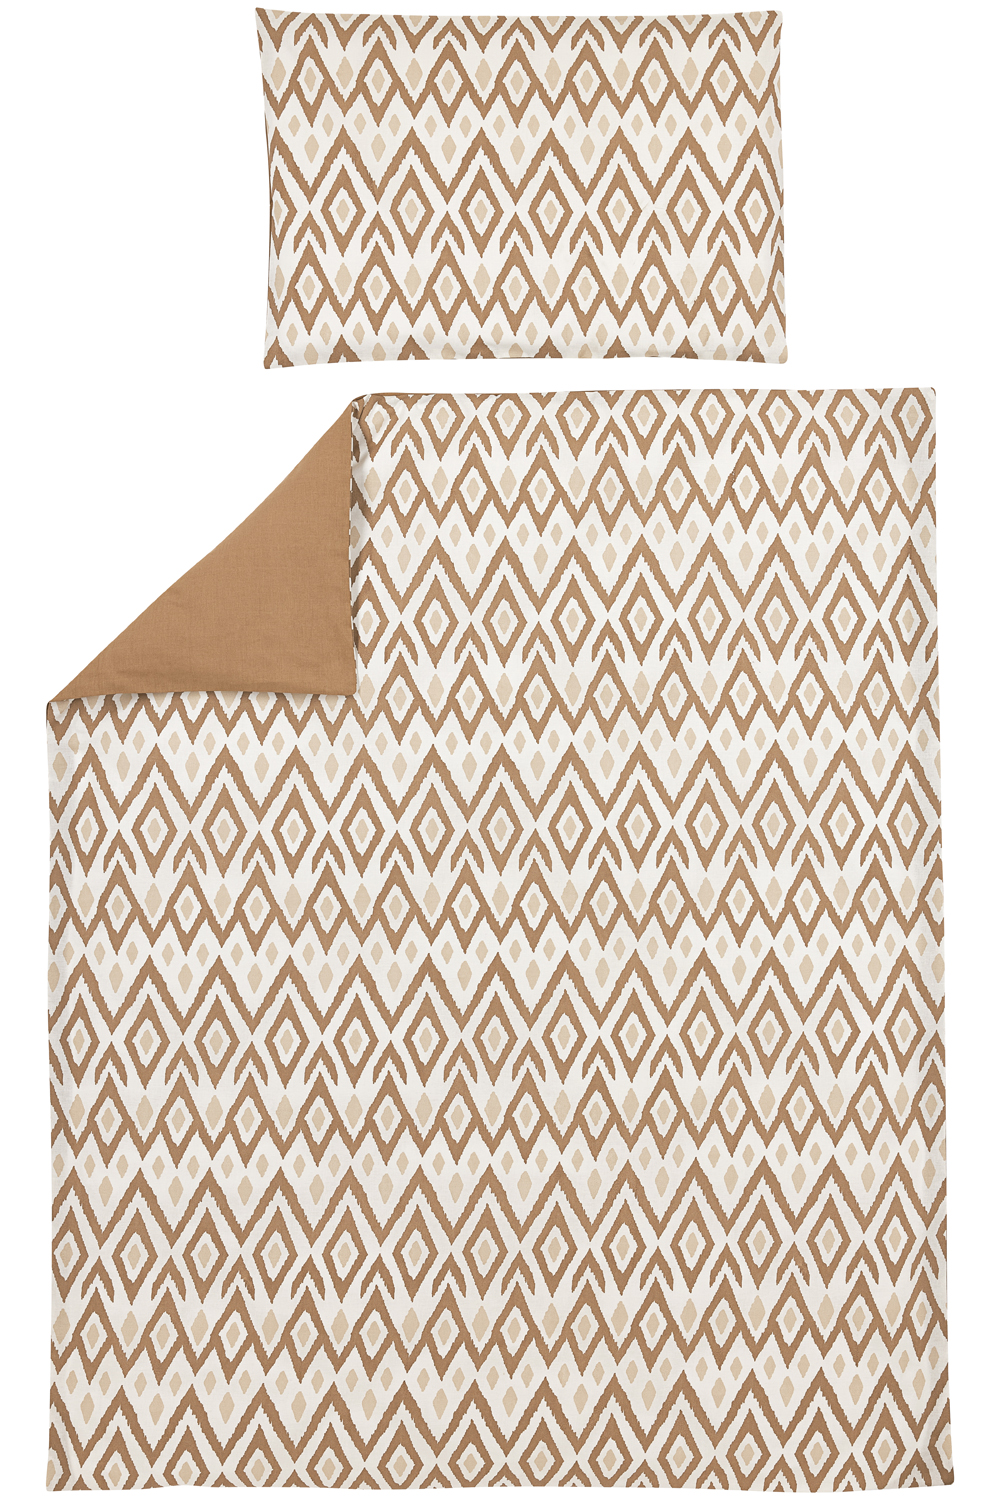 Duvet cover cot bed Ikat - sand/toffee - 100x135cm